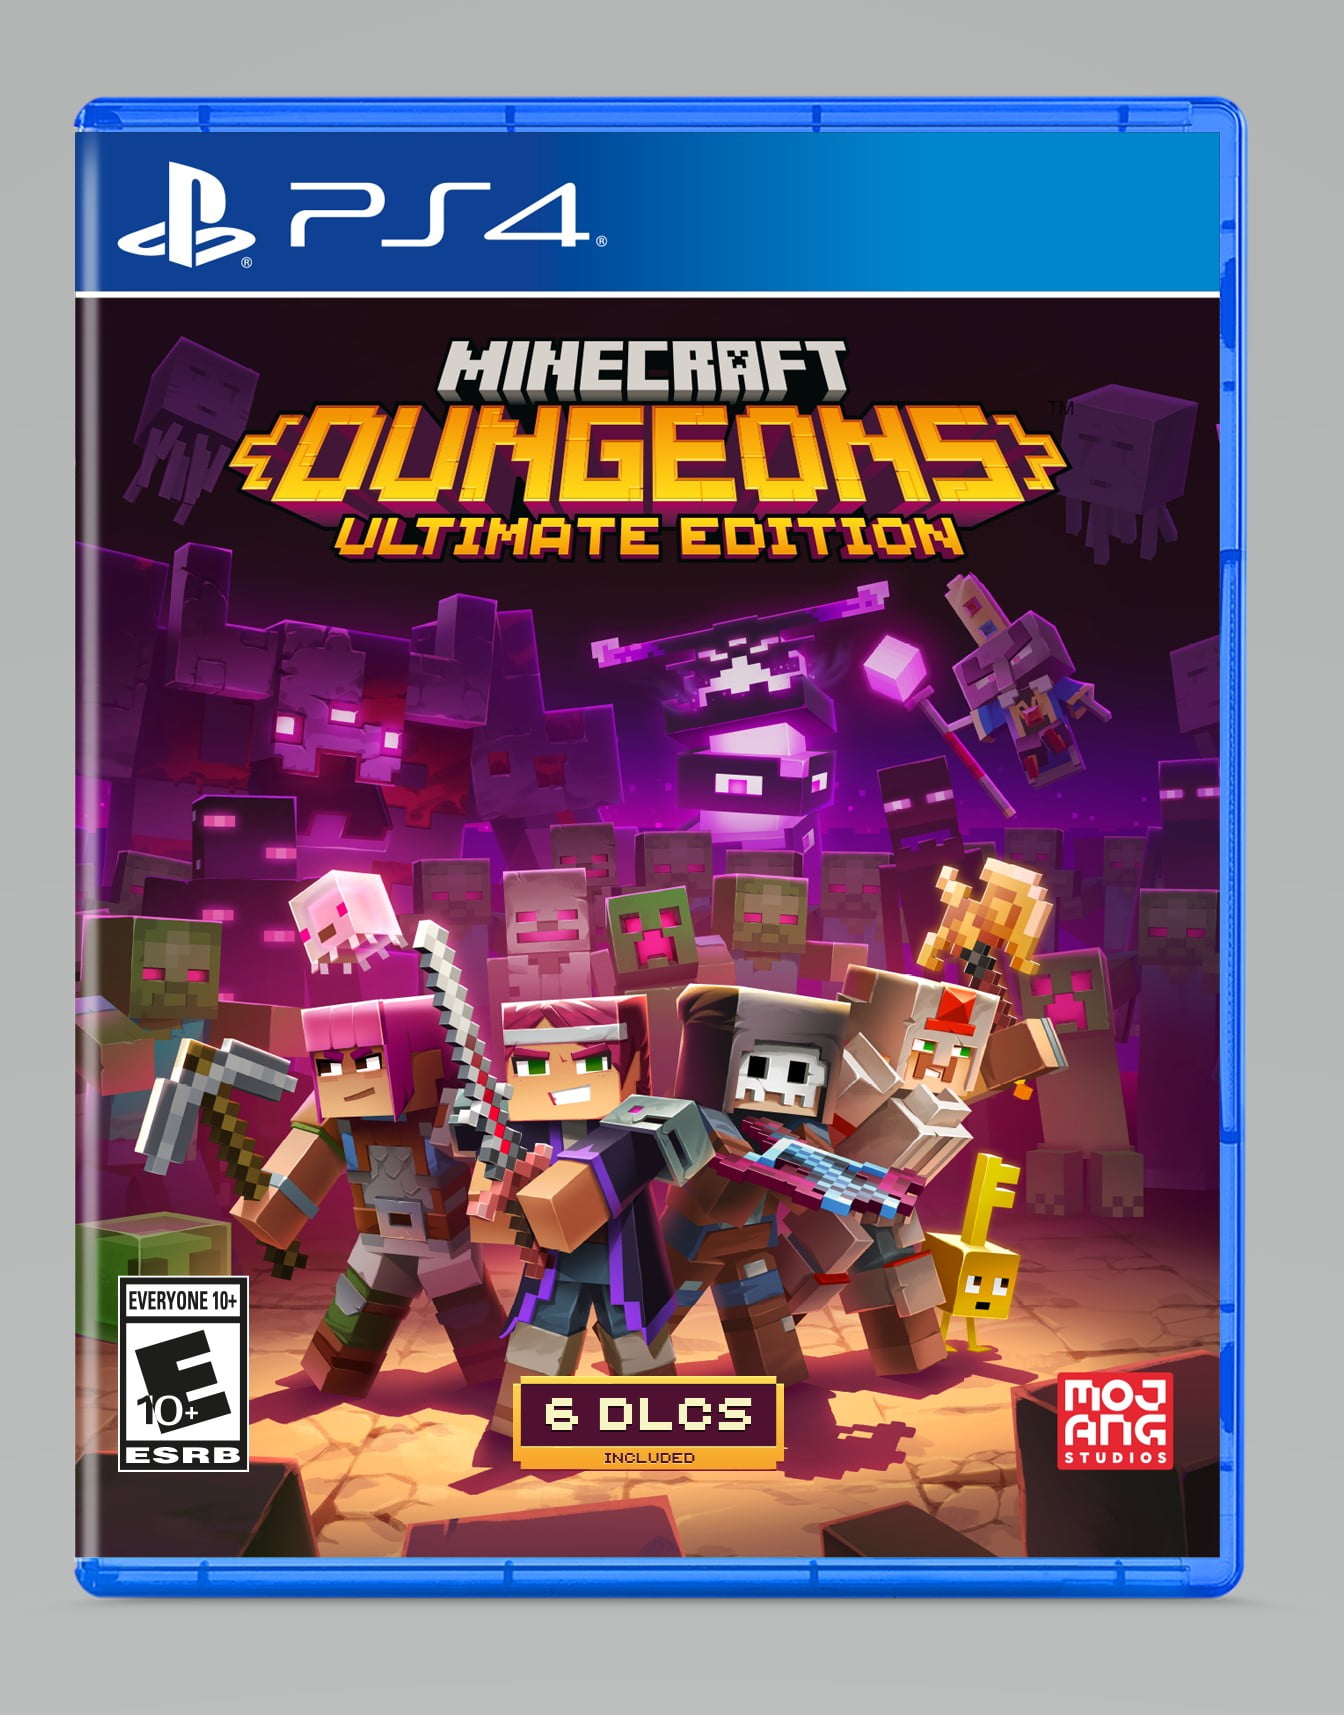 Minecraft Dungeons Ultimate Edition, Xbox Game Studios